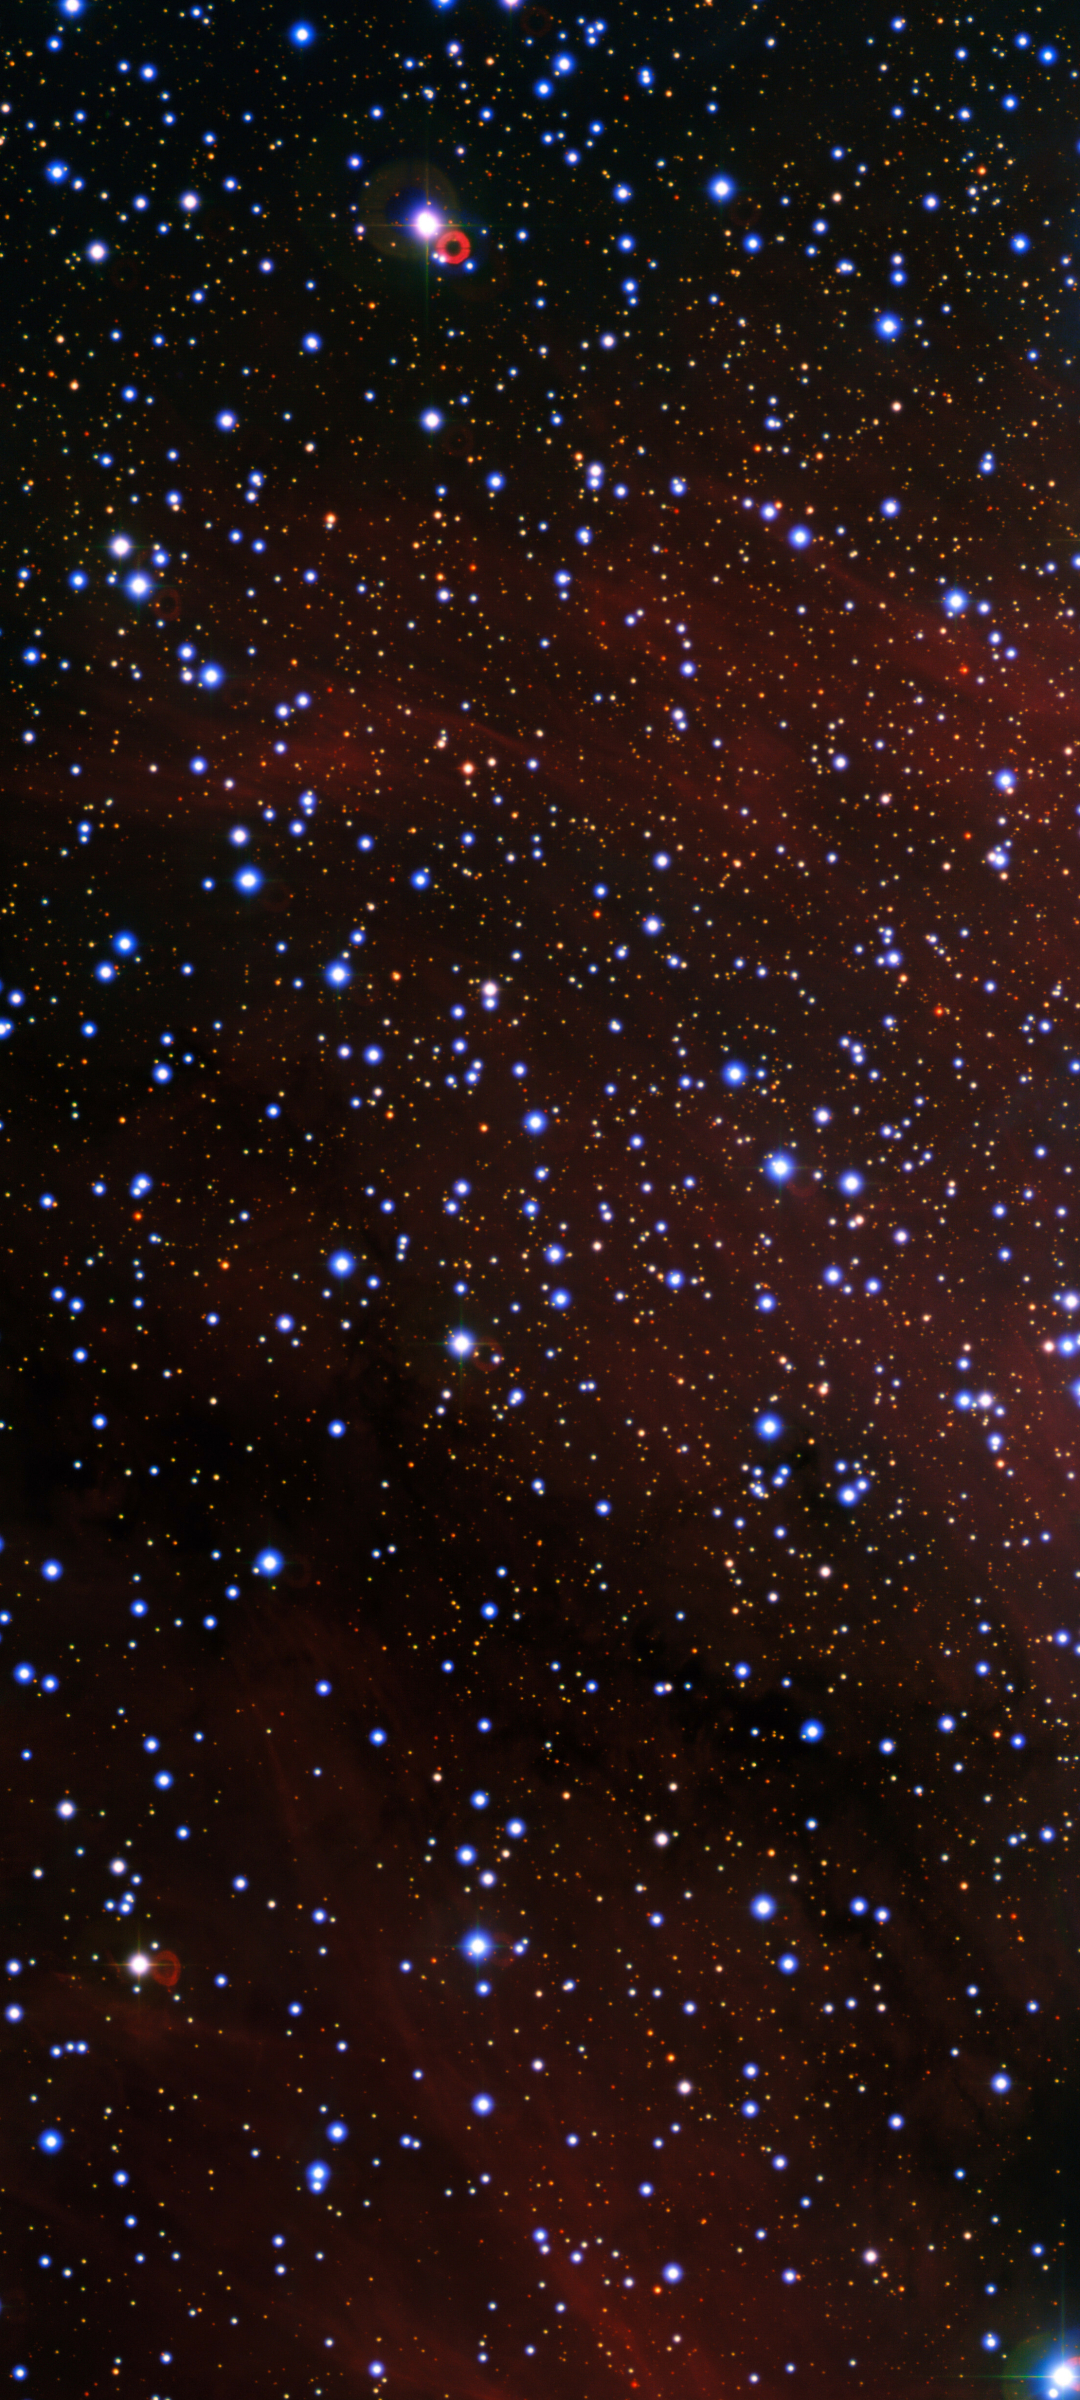 Open star cluster NGC 3293 by ESO